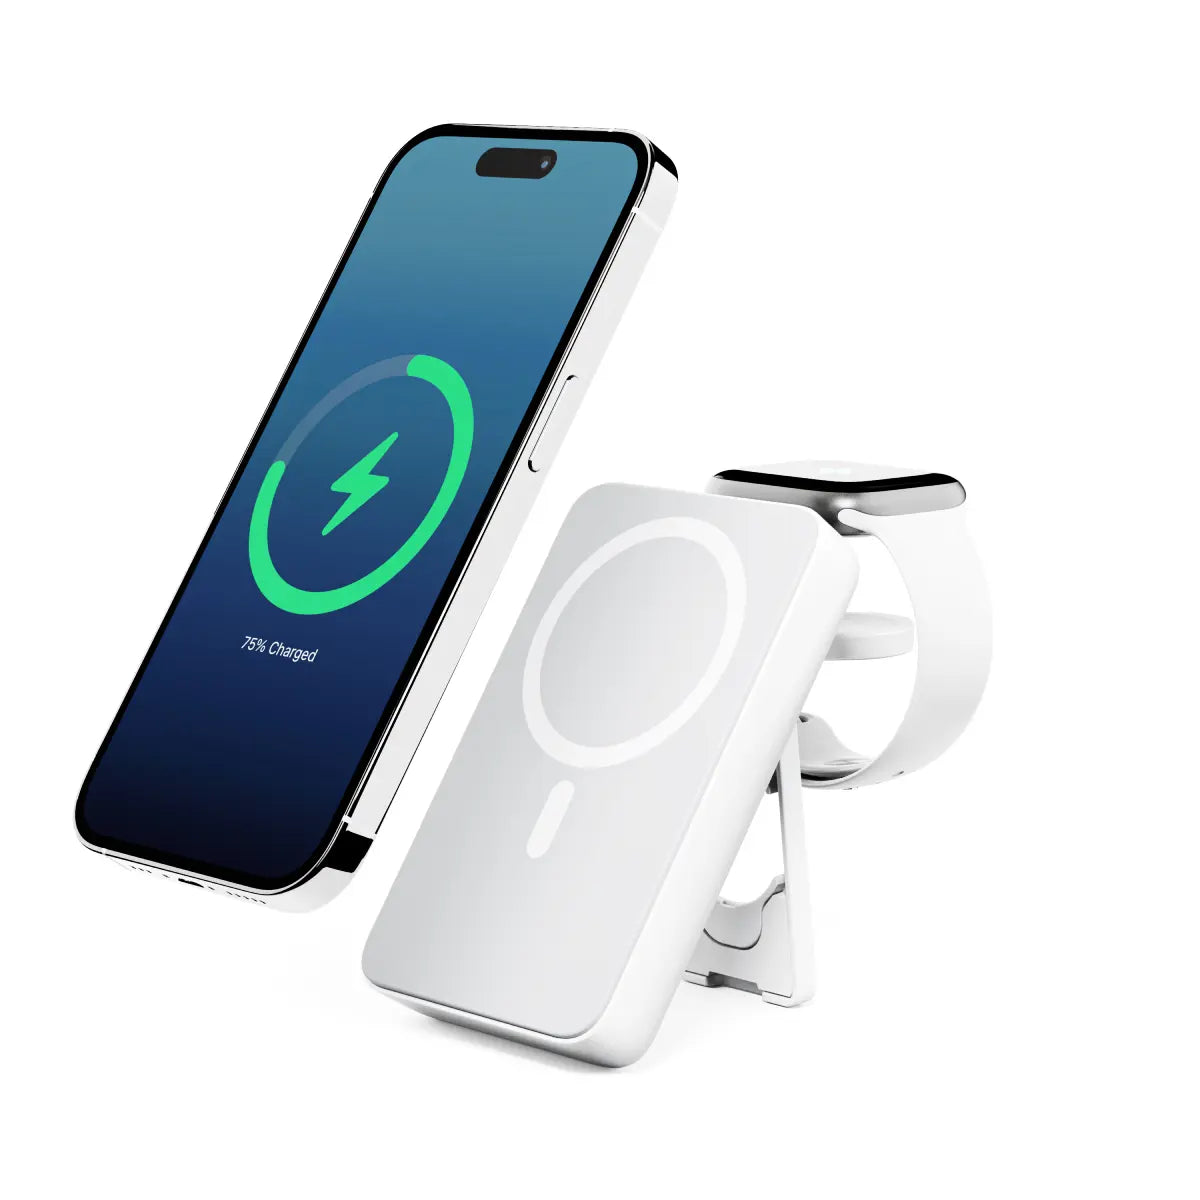 A large marketing image providing additional information about the product ALOGIC Lift 4-in-1 MagSafe Compatible Wireless Charging 10,000mAh Power Bank - Additional alt info not provided